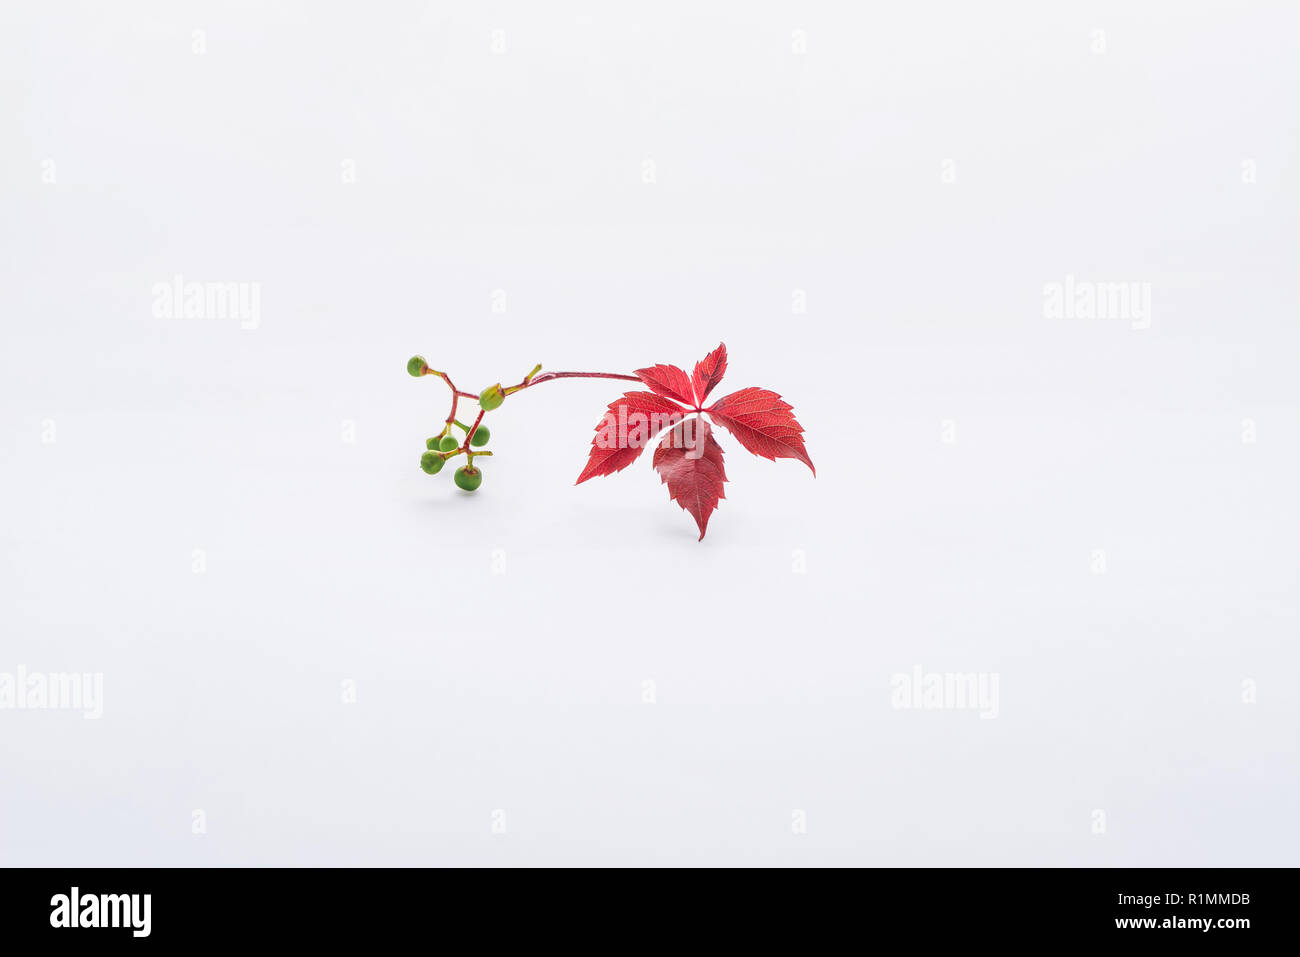 beautiful twig with burgundy leaves and green berries isolated on white Stock Photo